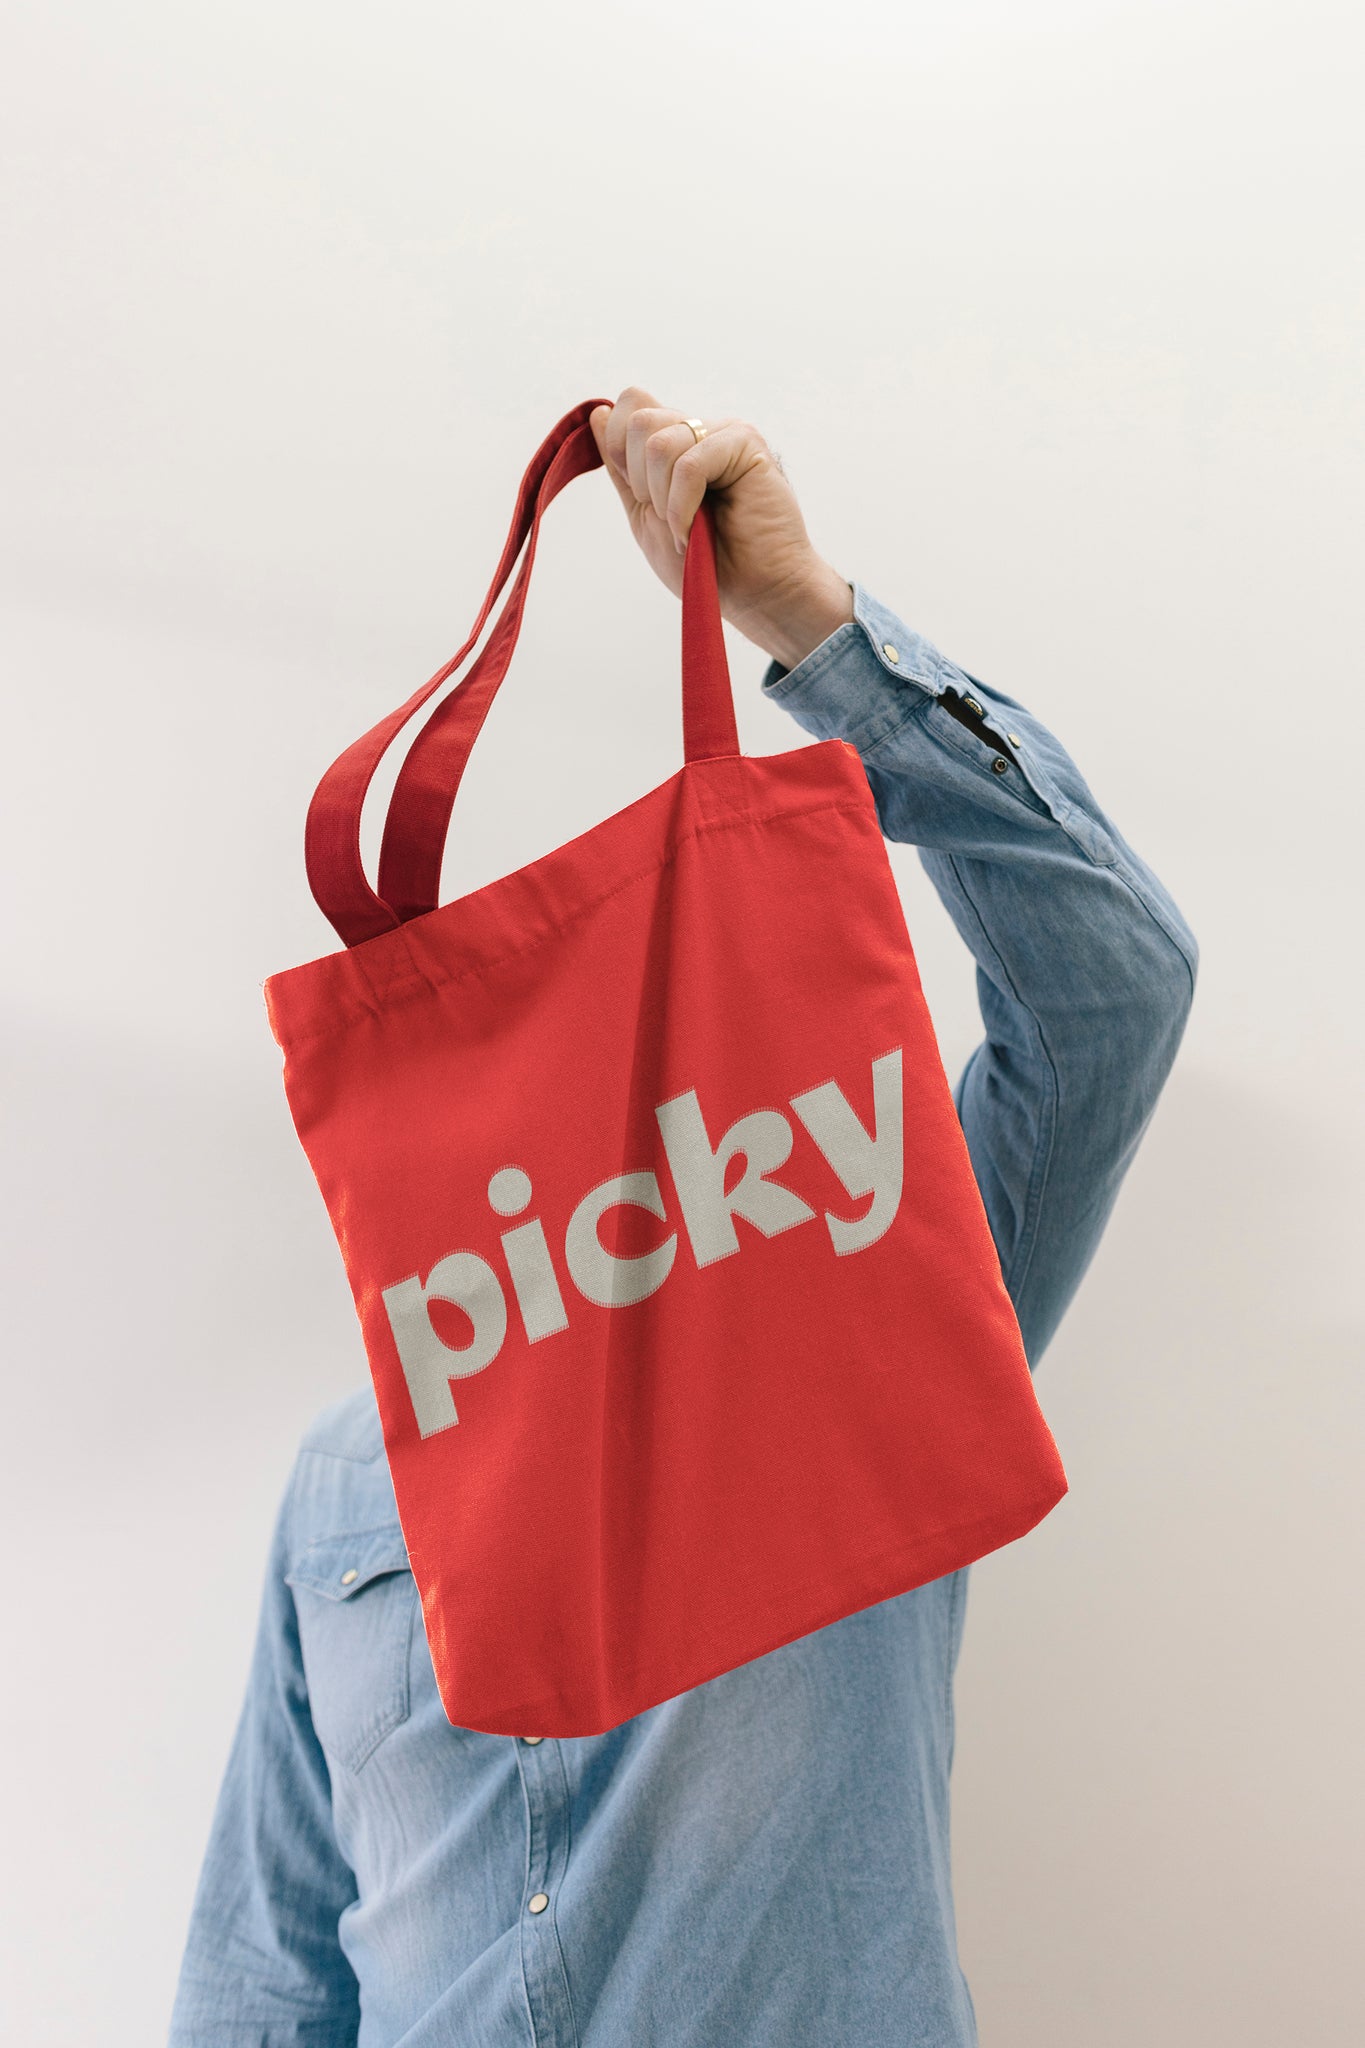 Person holding a red tote bag over their head. Bag has the word Picky noted in a soft white colour in the middle of the bag. Person is standing against a plain grey wall wearing a long sleeve denim shirt. 